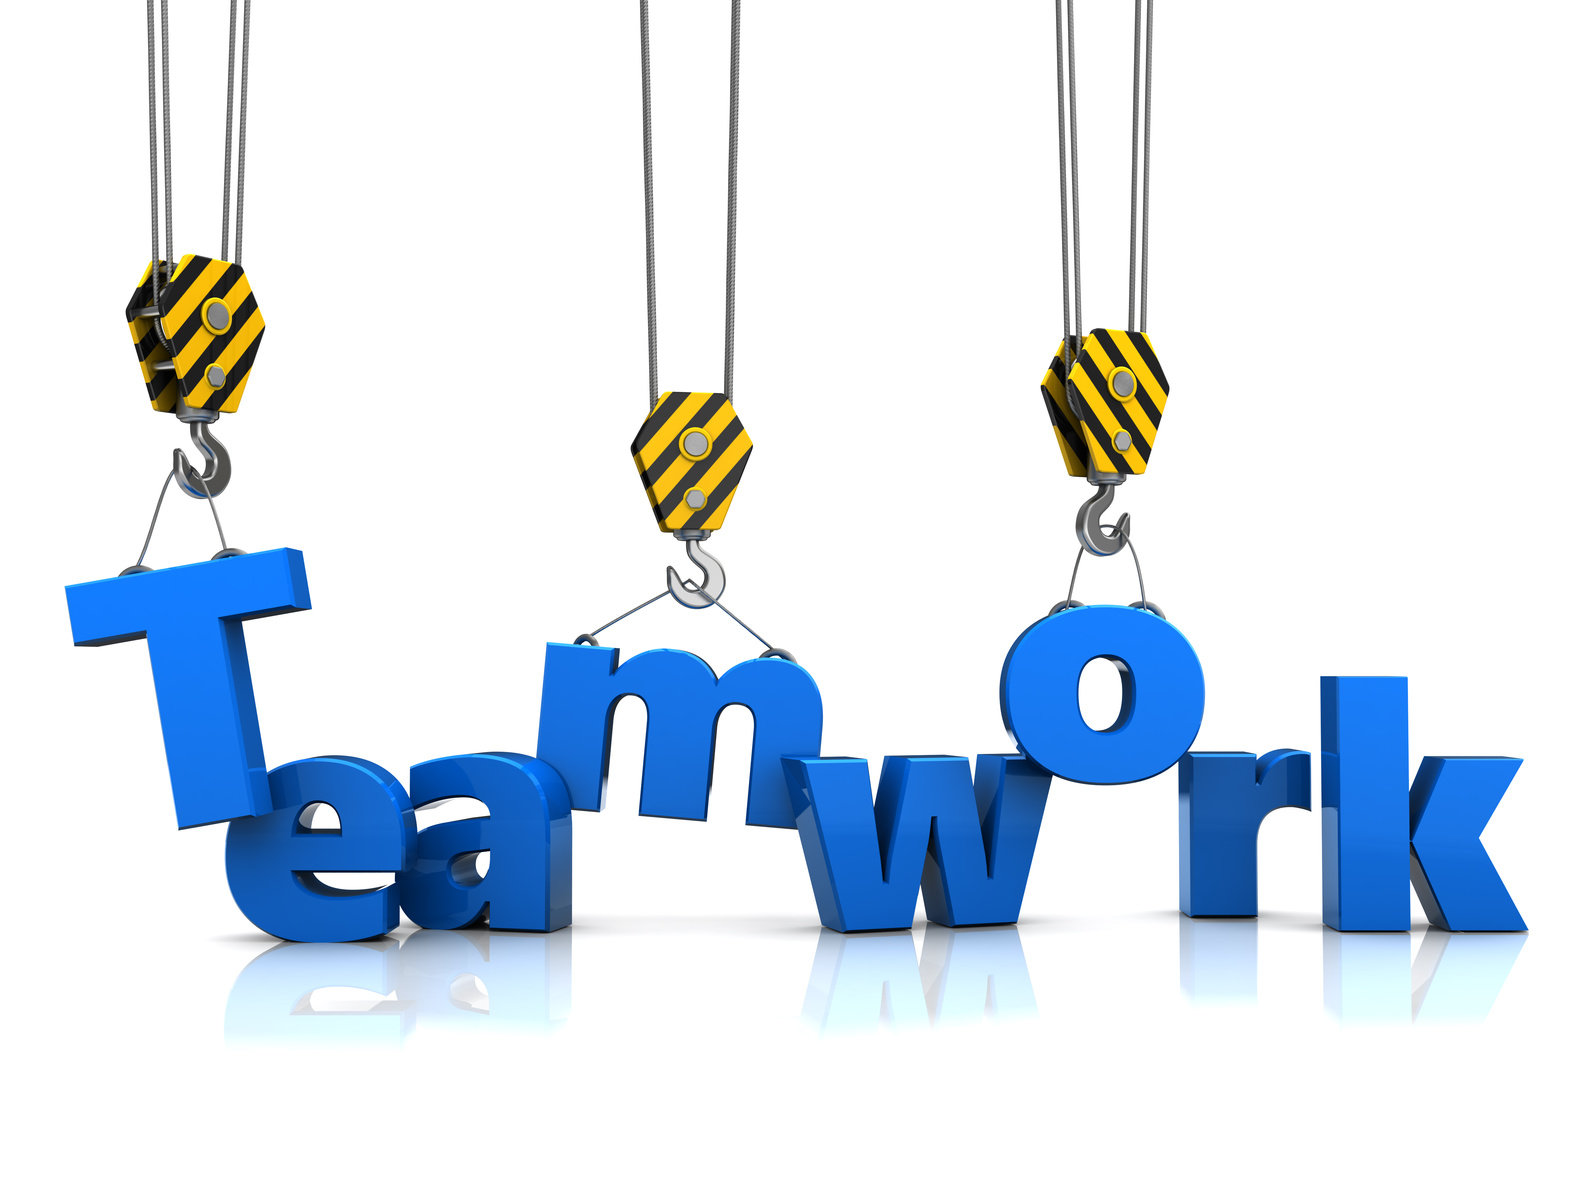 Do your team projects sometimes mirror the work of this team? Video – Very Funny  Teamwork Video.